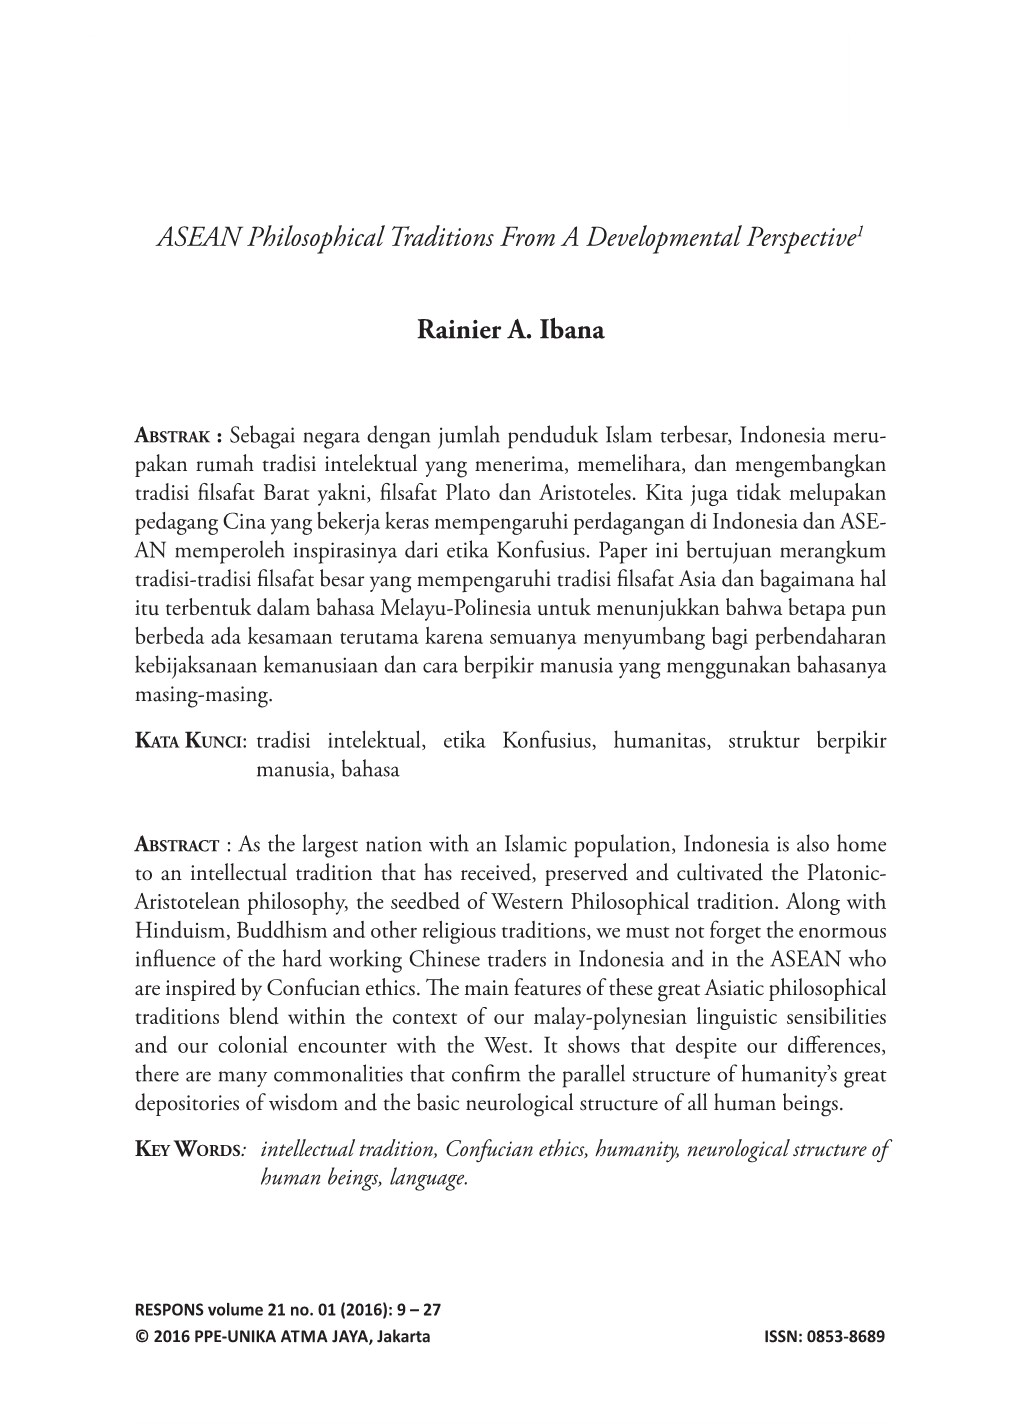 ASEAN Philosophical Traditions from a Developmental Perspective1